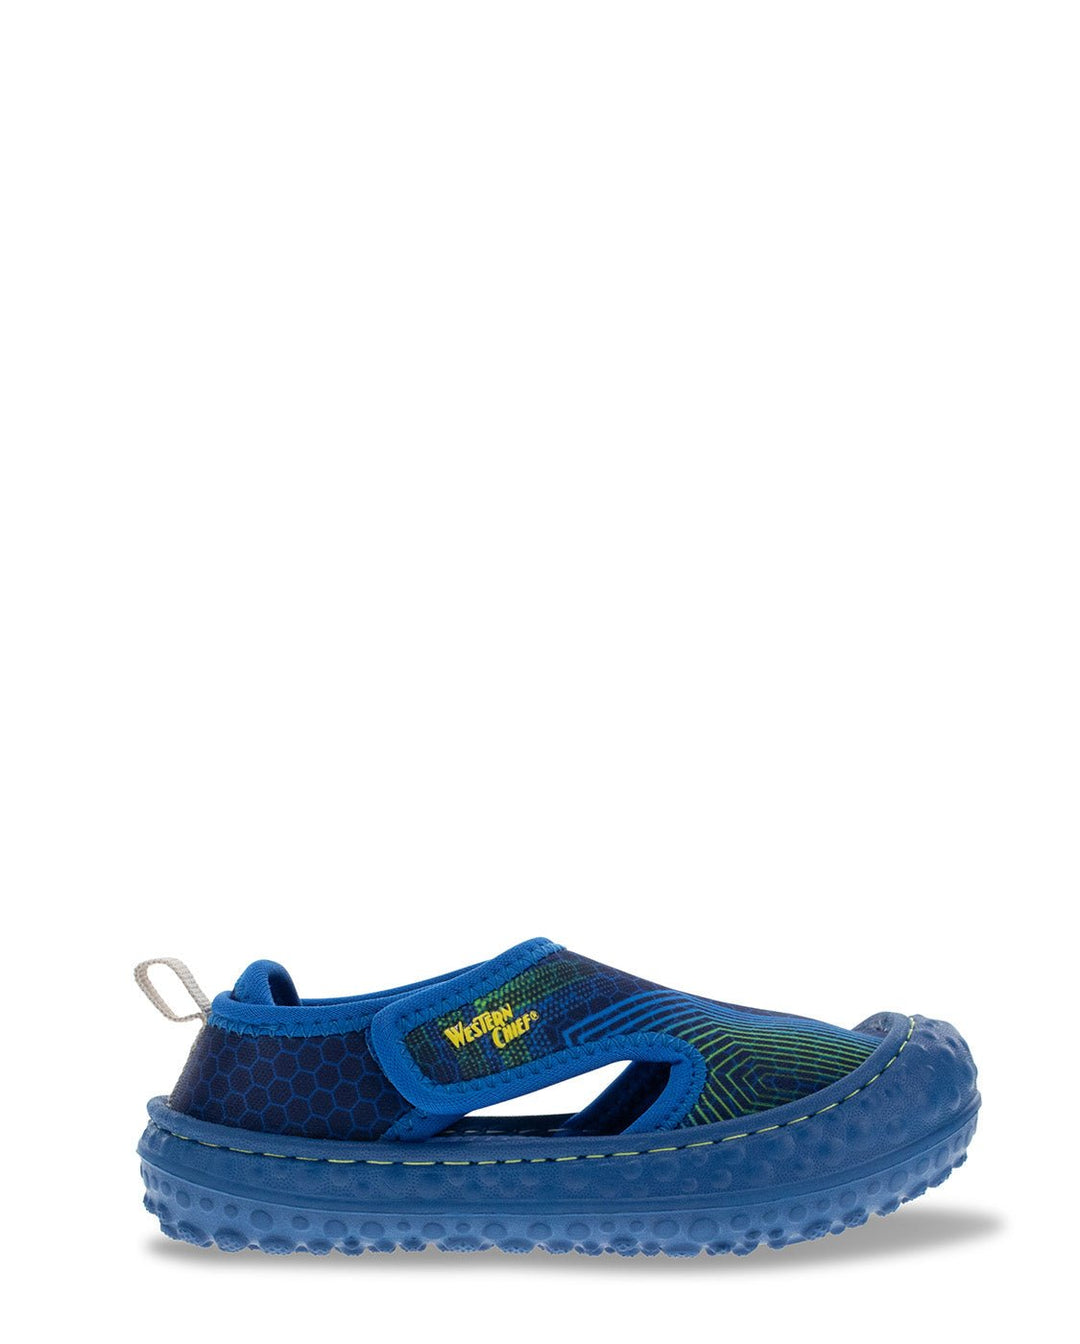 New! Kids Discover Sandal - Blue - Western Chief